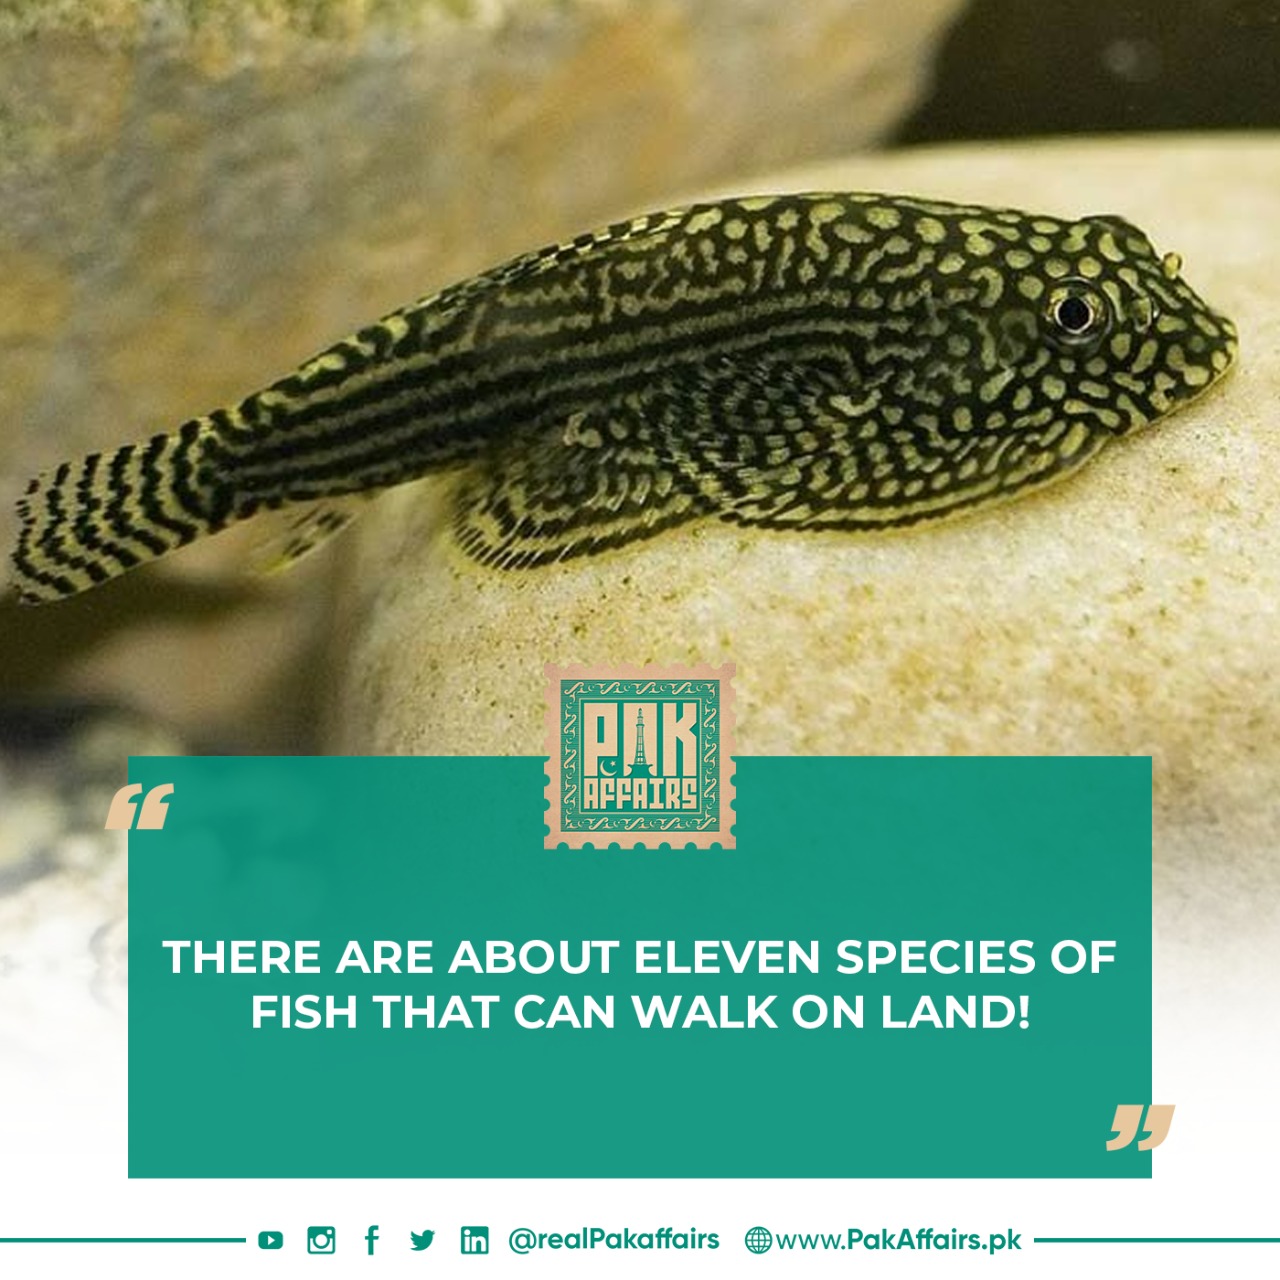 There are about eleven species of fish that can walk on land